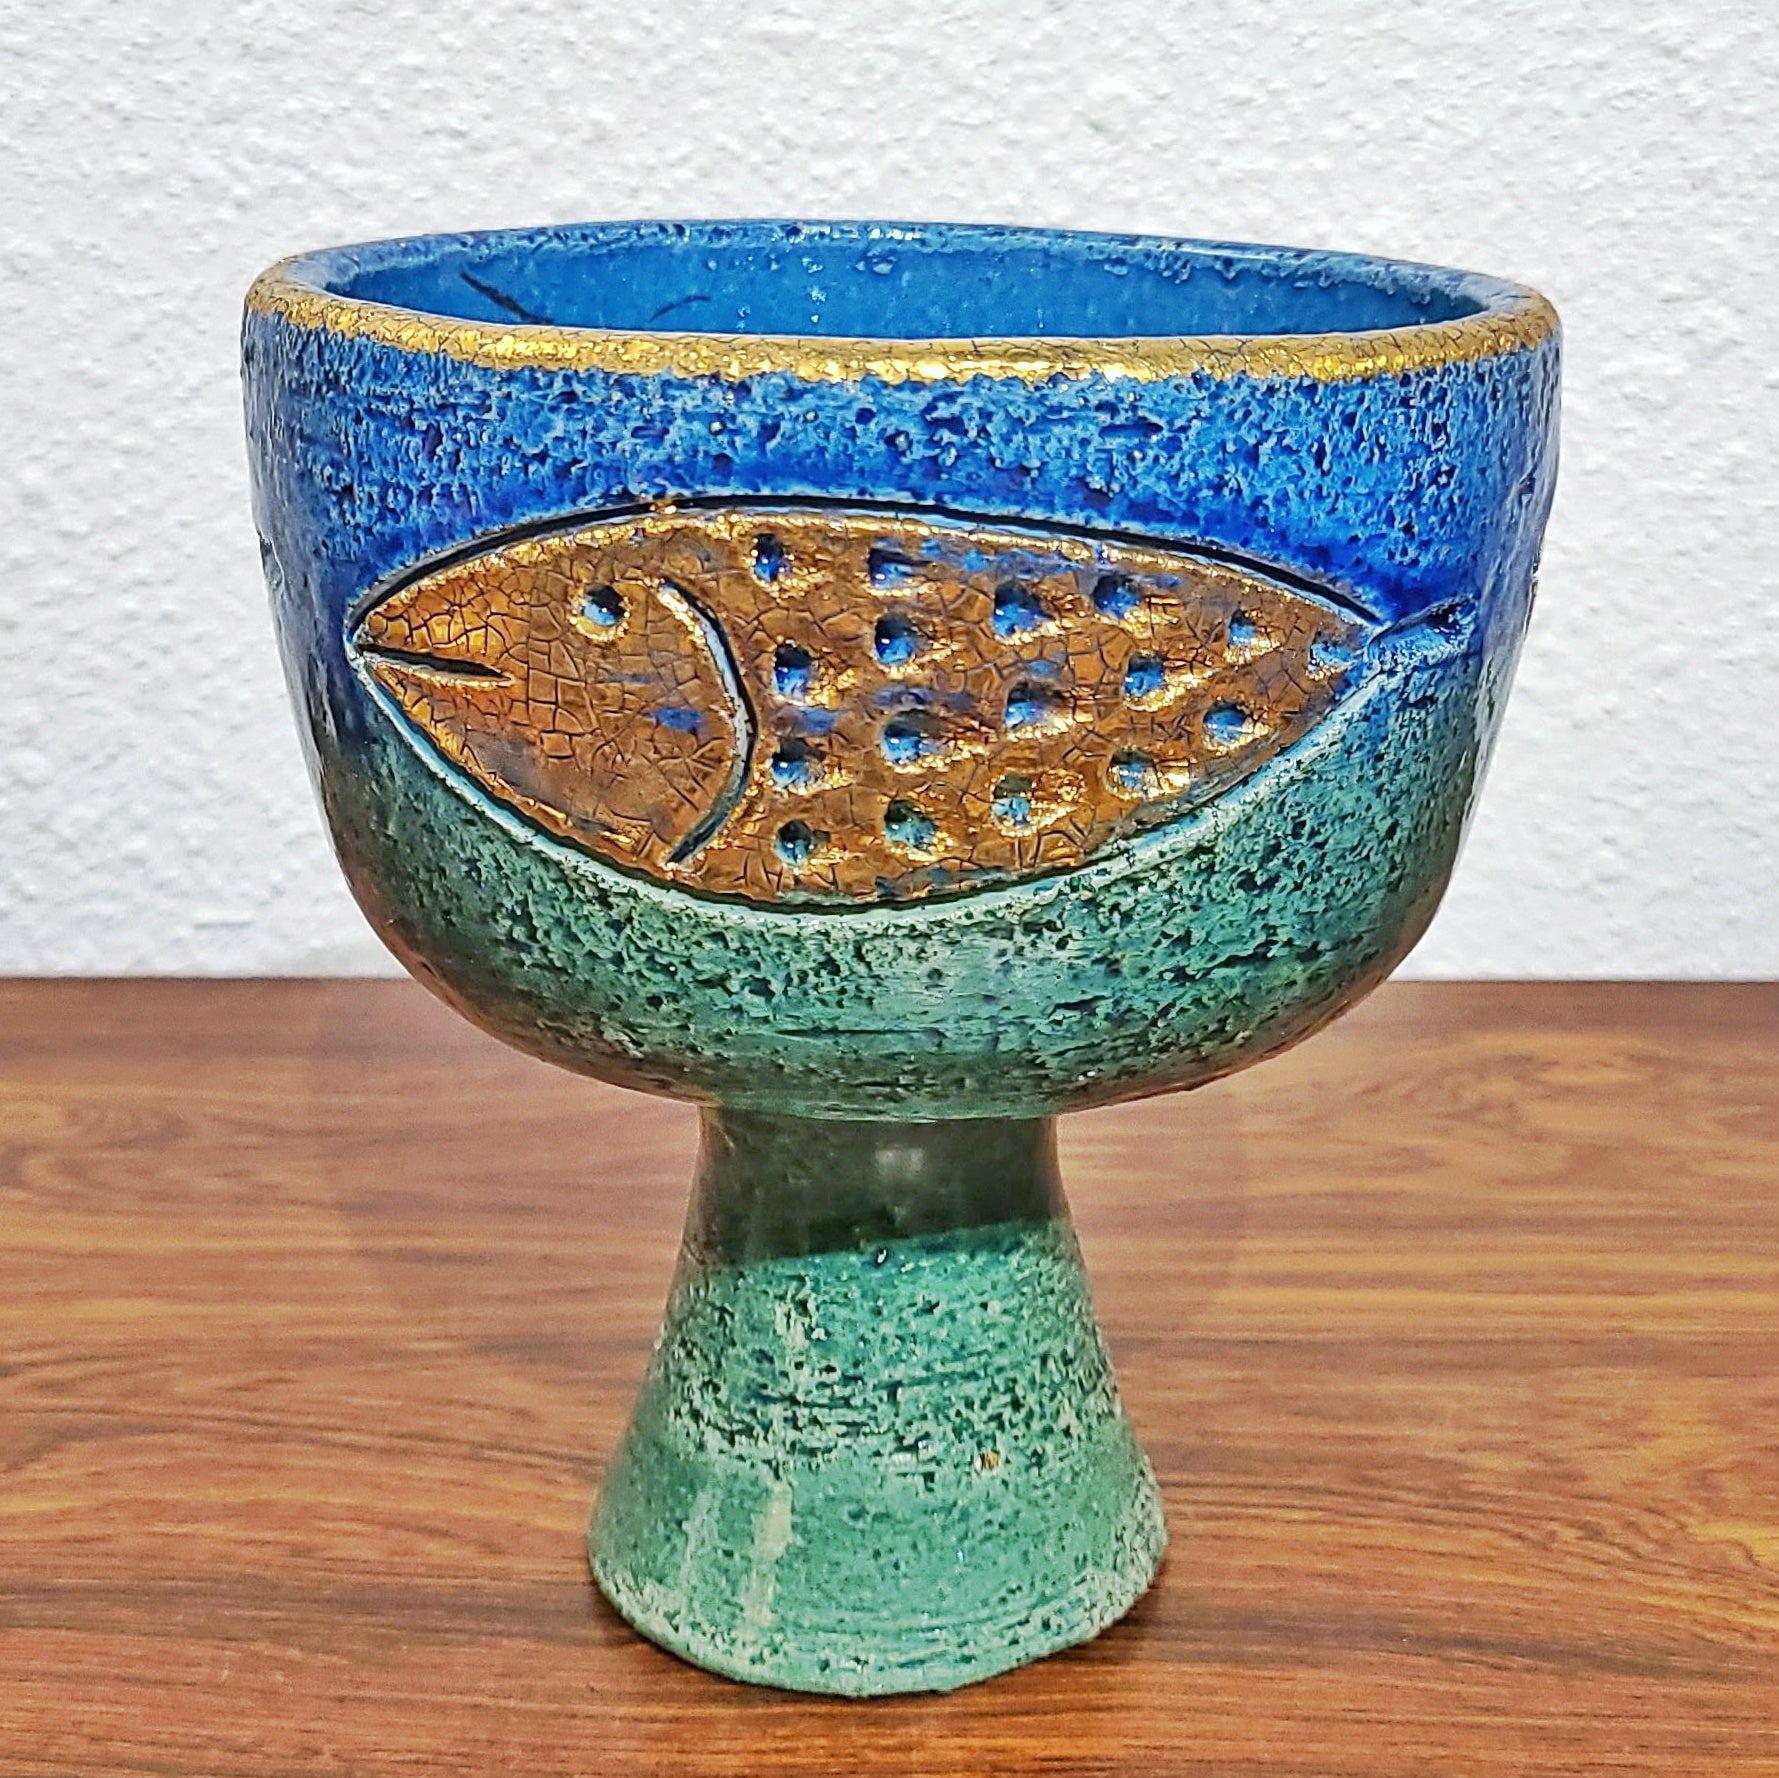 BITOSSI CHALICE/COMPOTE/CANDY DISH WITH A GOLDEN FISH DECOR